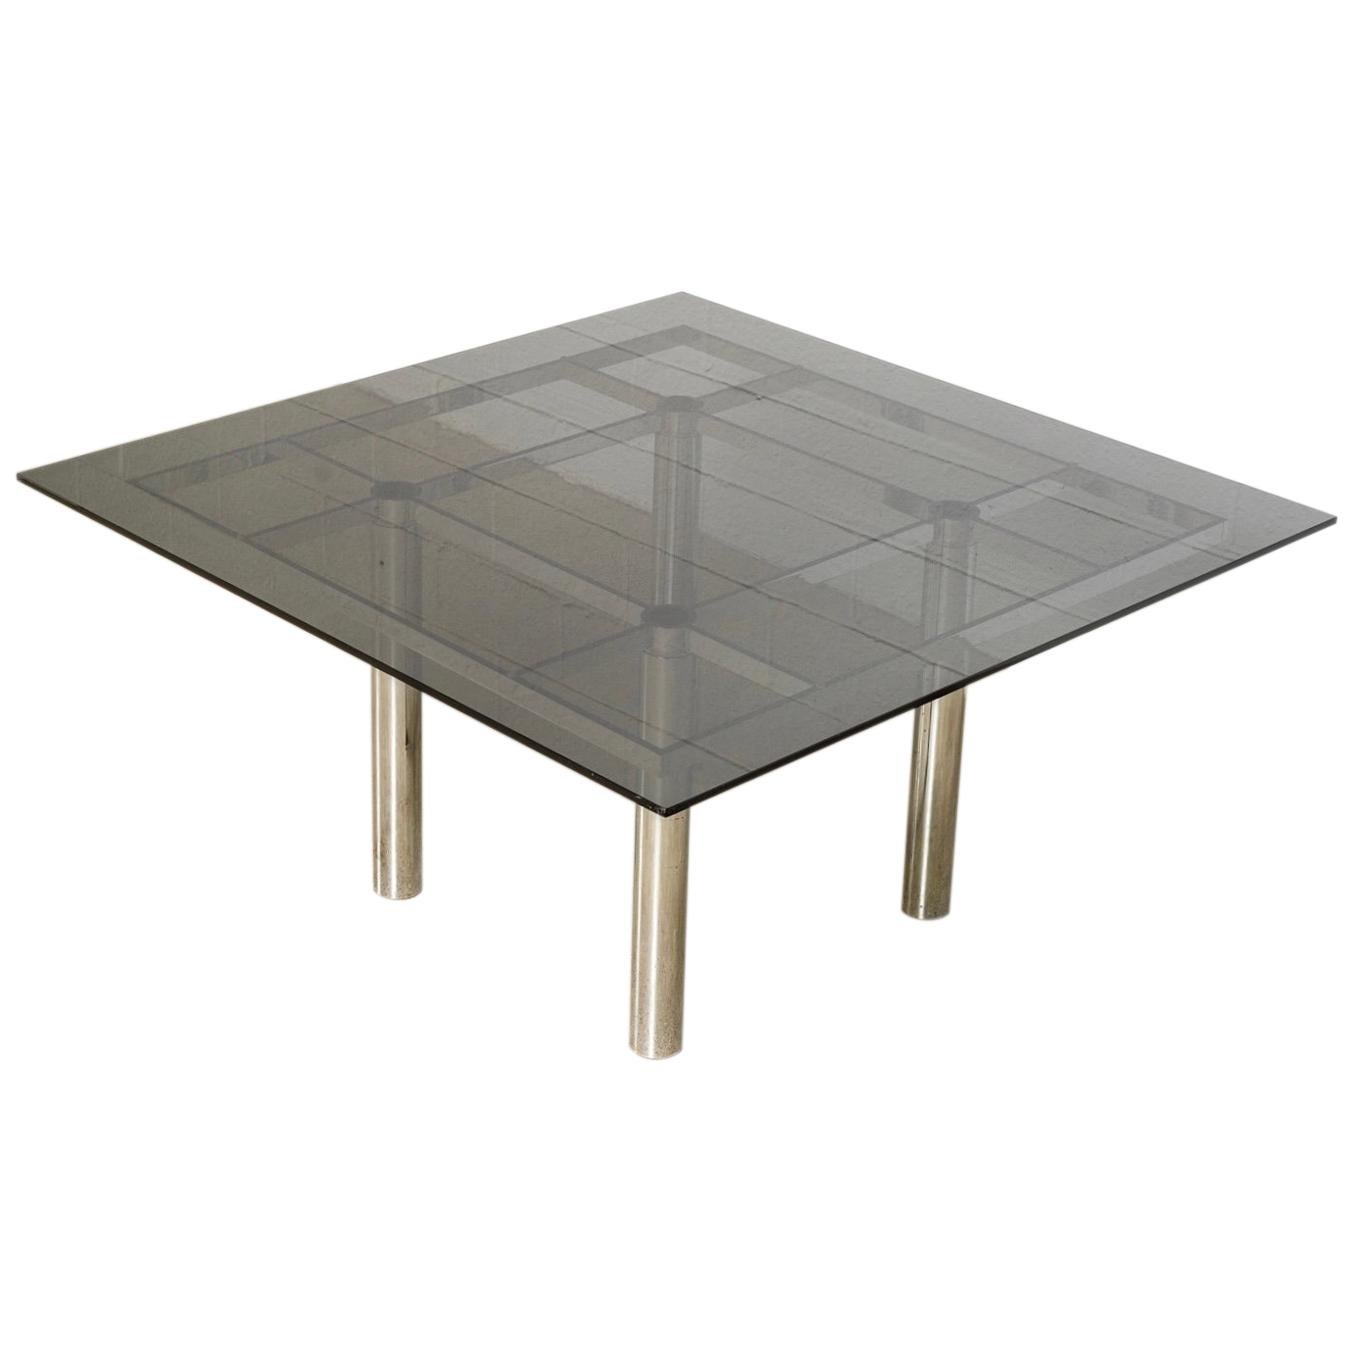 Midcentury Tobia Scarpa for Knoll Andre Square Glass and Chrome Dining Table For Sale